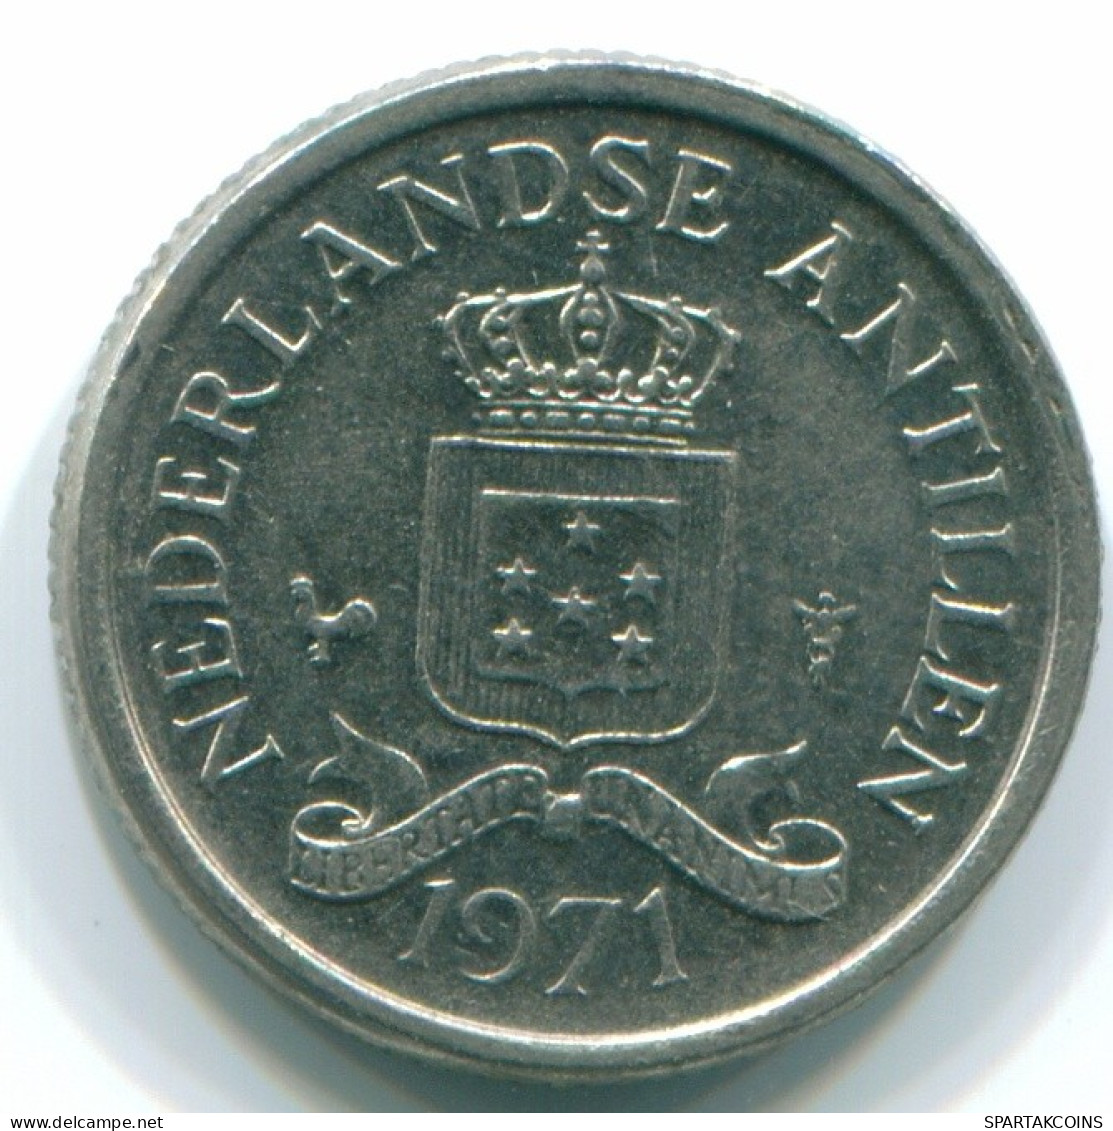 10 CENTS 1971 NETHERLANDS ANTILLES Nickel Colonial Coin #S13432.U.A - Antille Olandesi